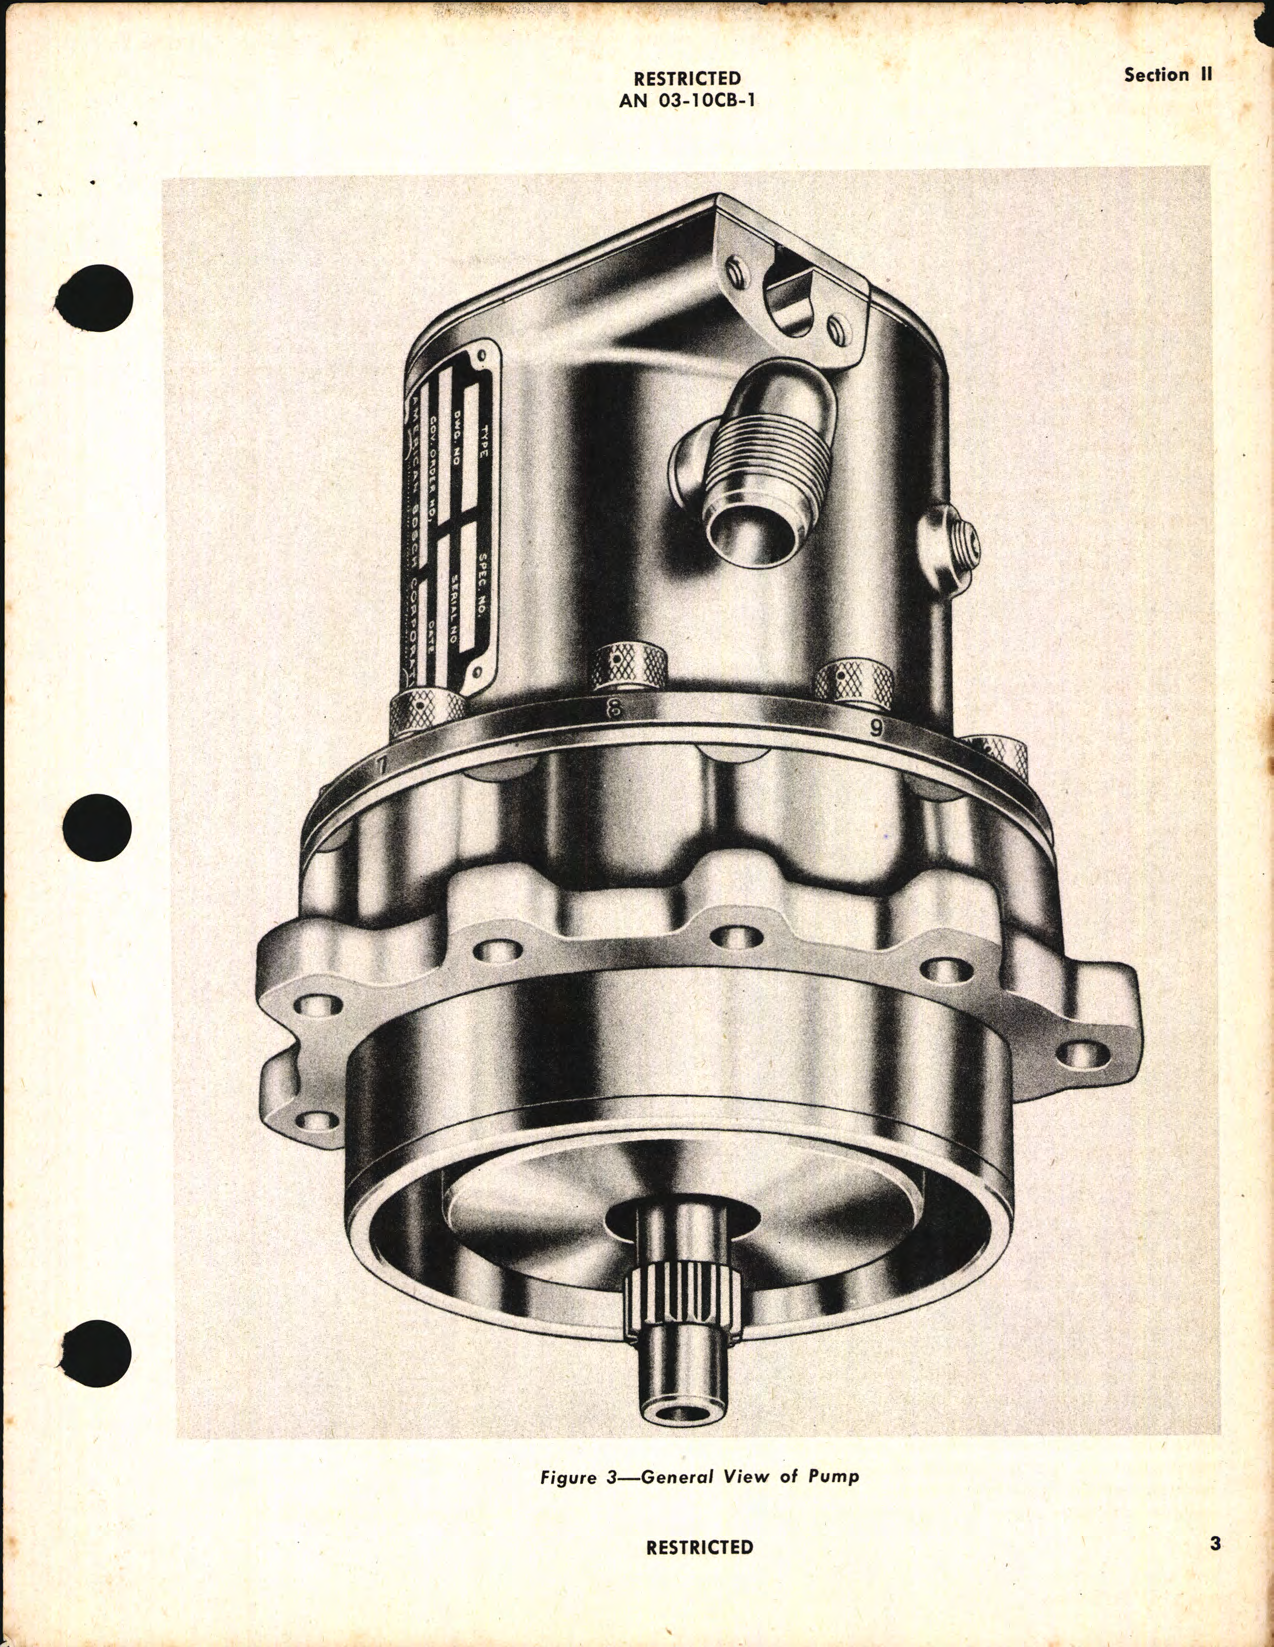 Sample page 7 from AirCorps Library document: Handbook of Instructions with Parts Catalog for Gasoline Injection System Model 58-18-A1B